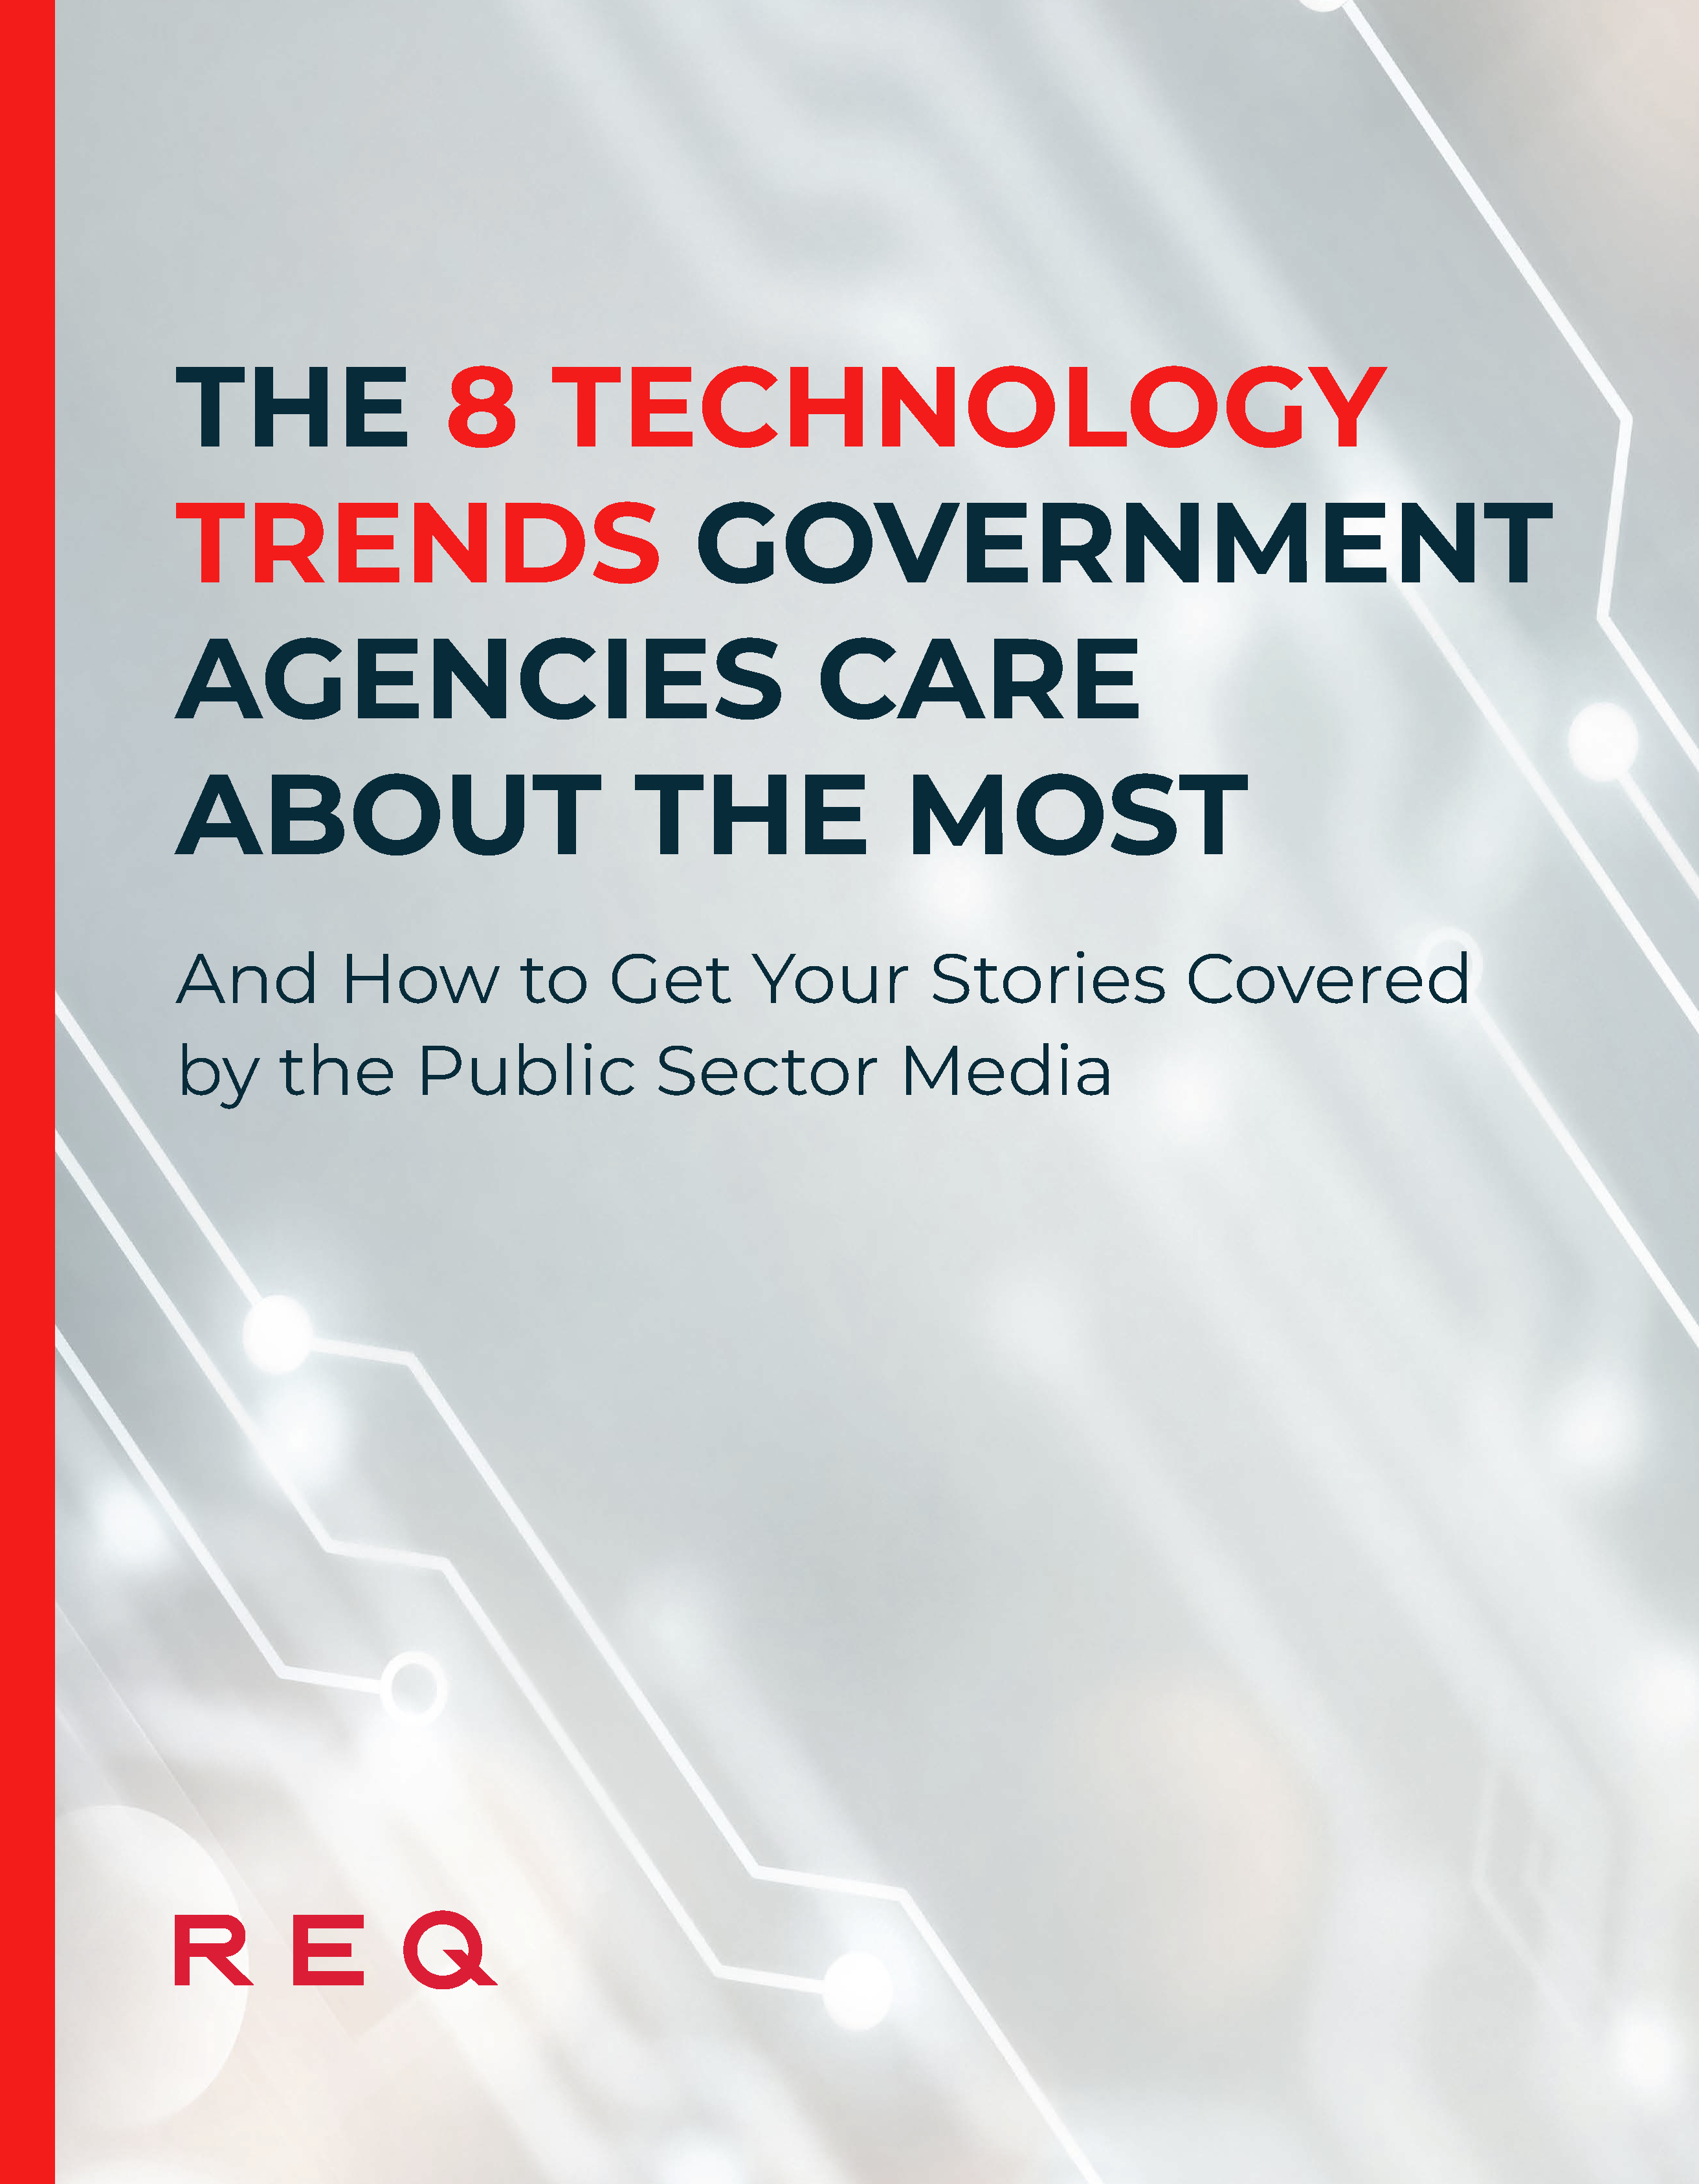 The 8 Technology Trends Government Agencies Care About the Most